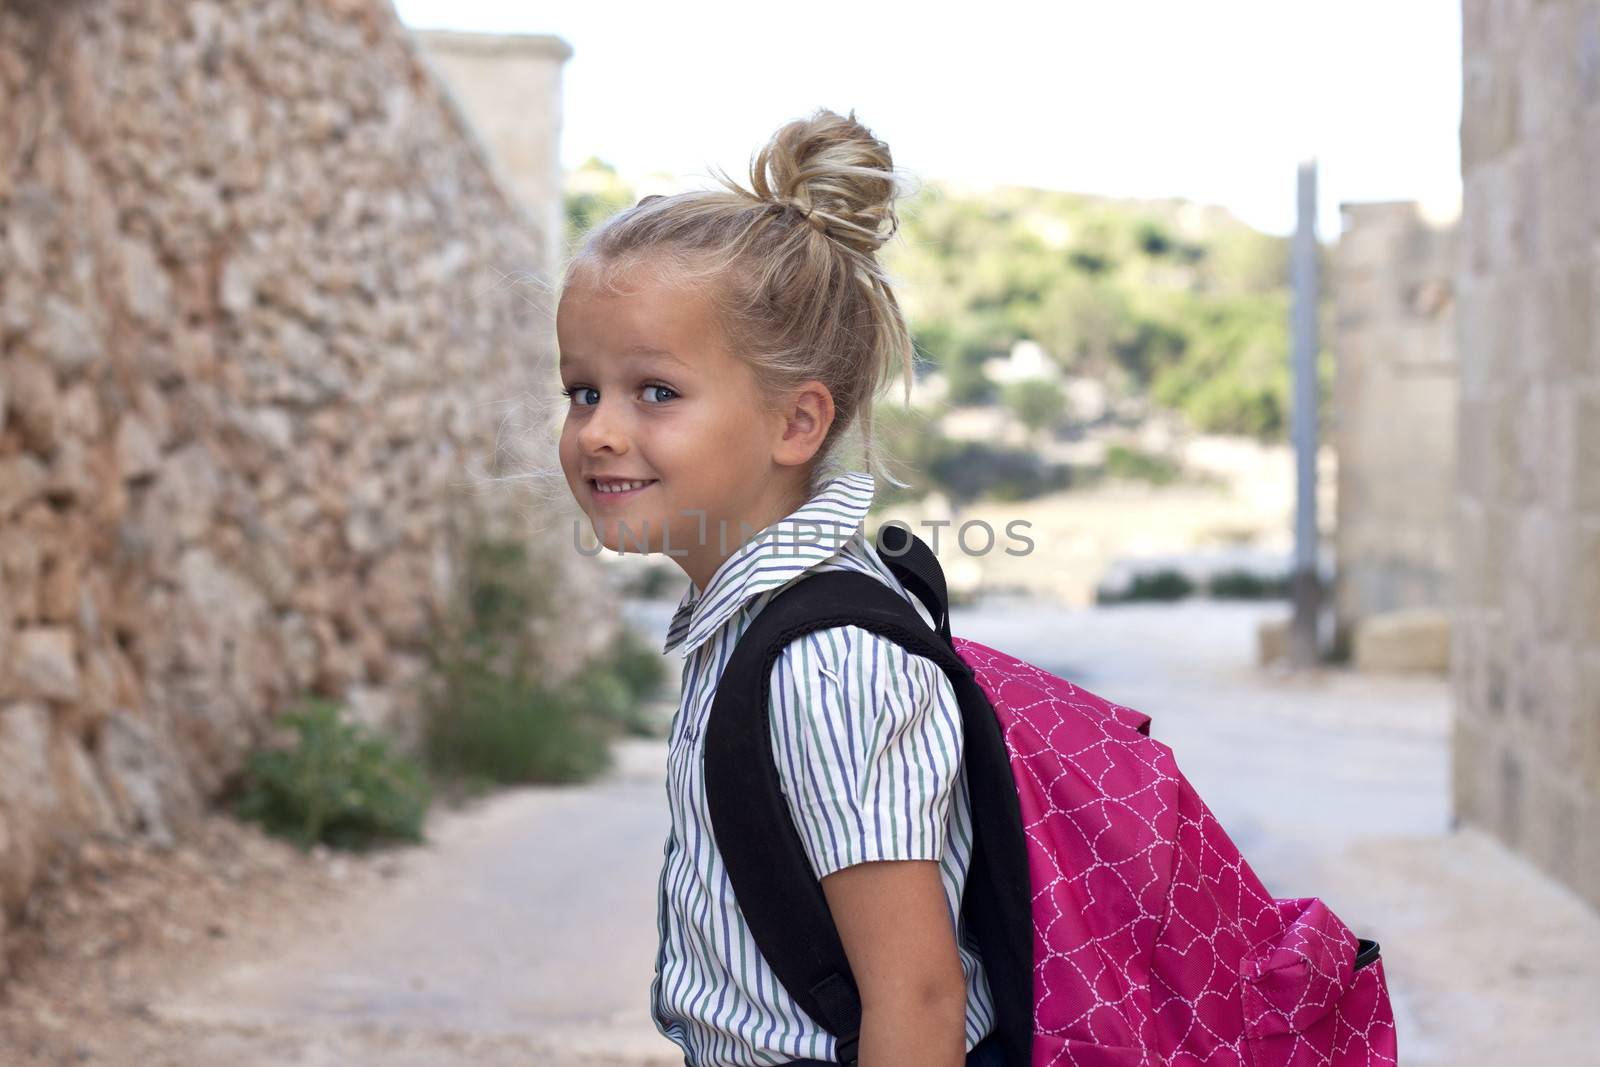 A young child with school uniform and bagpack outside, smiling, positive, looking at camera